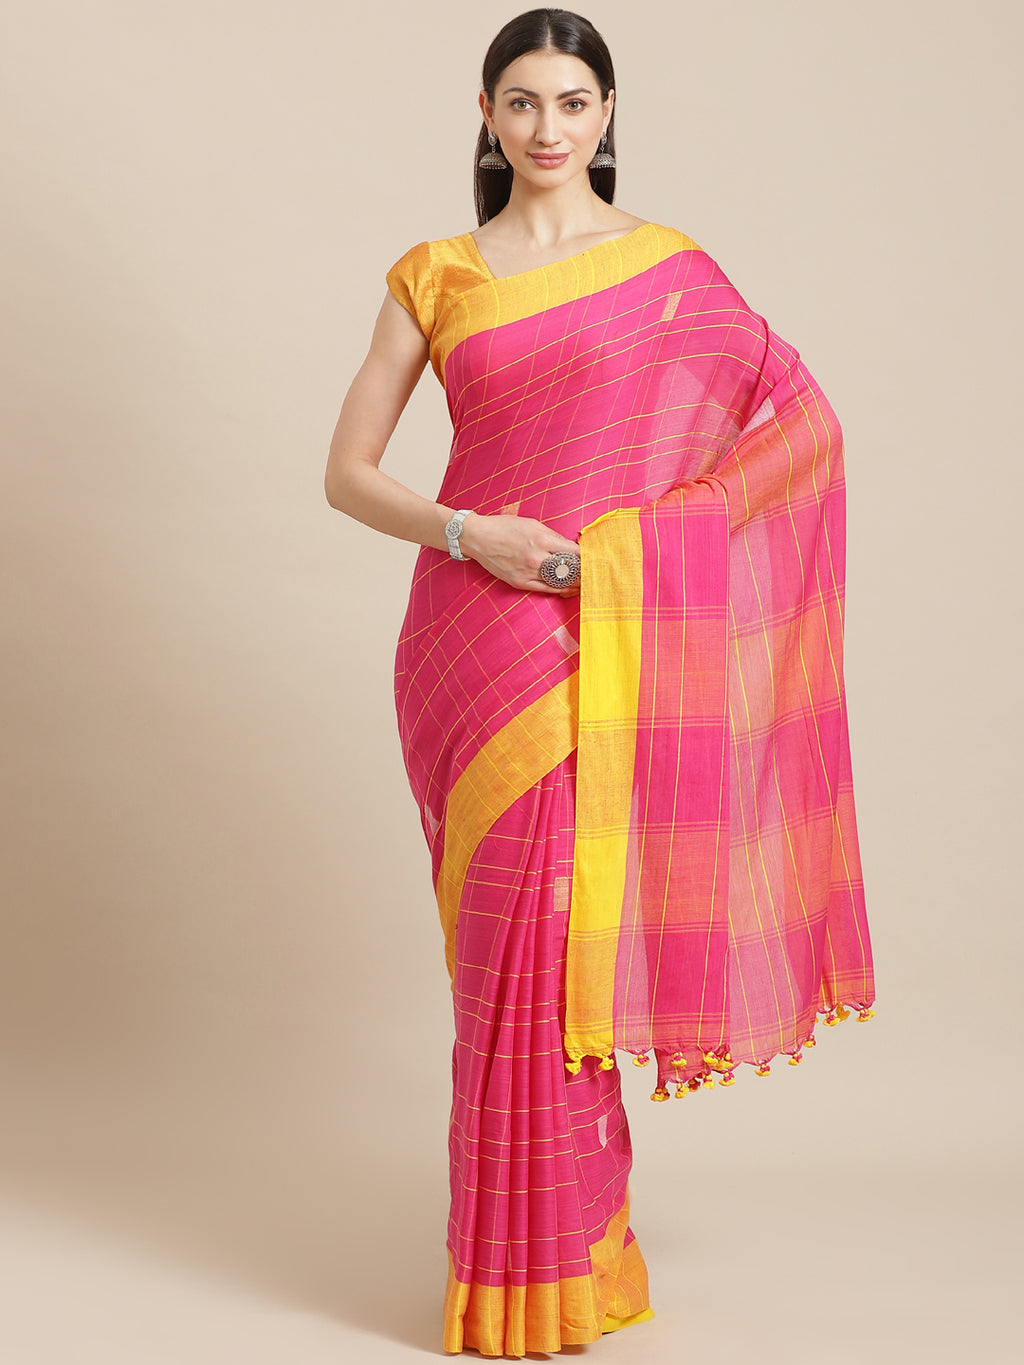 Pink and Yellow, Kalakari India Cotton Pink Hand crafted saree with blouse SHBESA0025-Saree-Kalakari India-SHBESA0025-Bengal, Cotton, Geographical Indication, Hand Crafted, Heritage Prints, Ikkat, Natural Dyes, Red, Sarees, Sustainable Fabrics, Woven, Yellow-[Linen,Ethnic,wear,Fashionista,Handloom,Handicraft,Indigo,blockprint,block,print,Cotton,Chanderi,Blue, latest,classy,party,bollywood,trendy,summer,style,traditional,formal,elegant,unique,style,hand,block,print, dabu,booti,gift,present,glamor